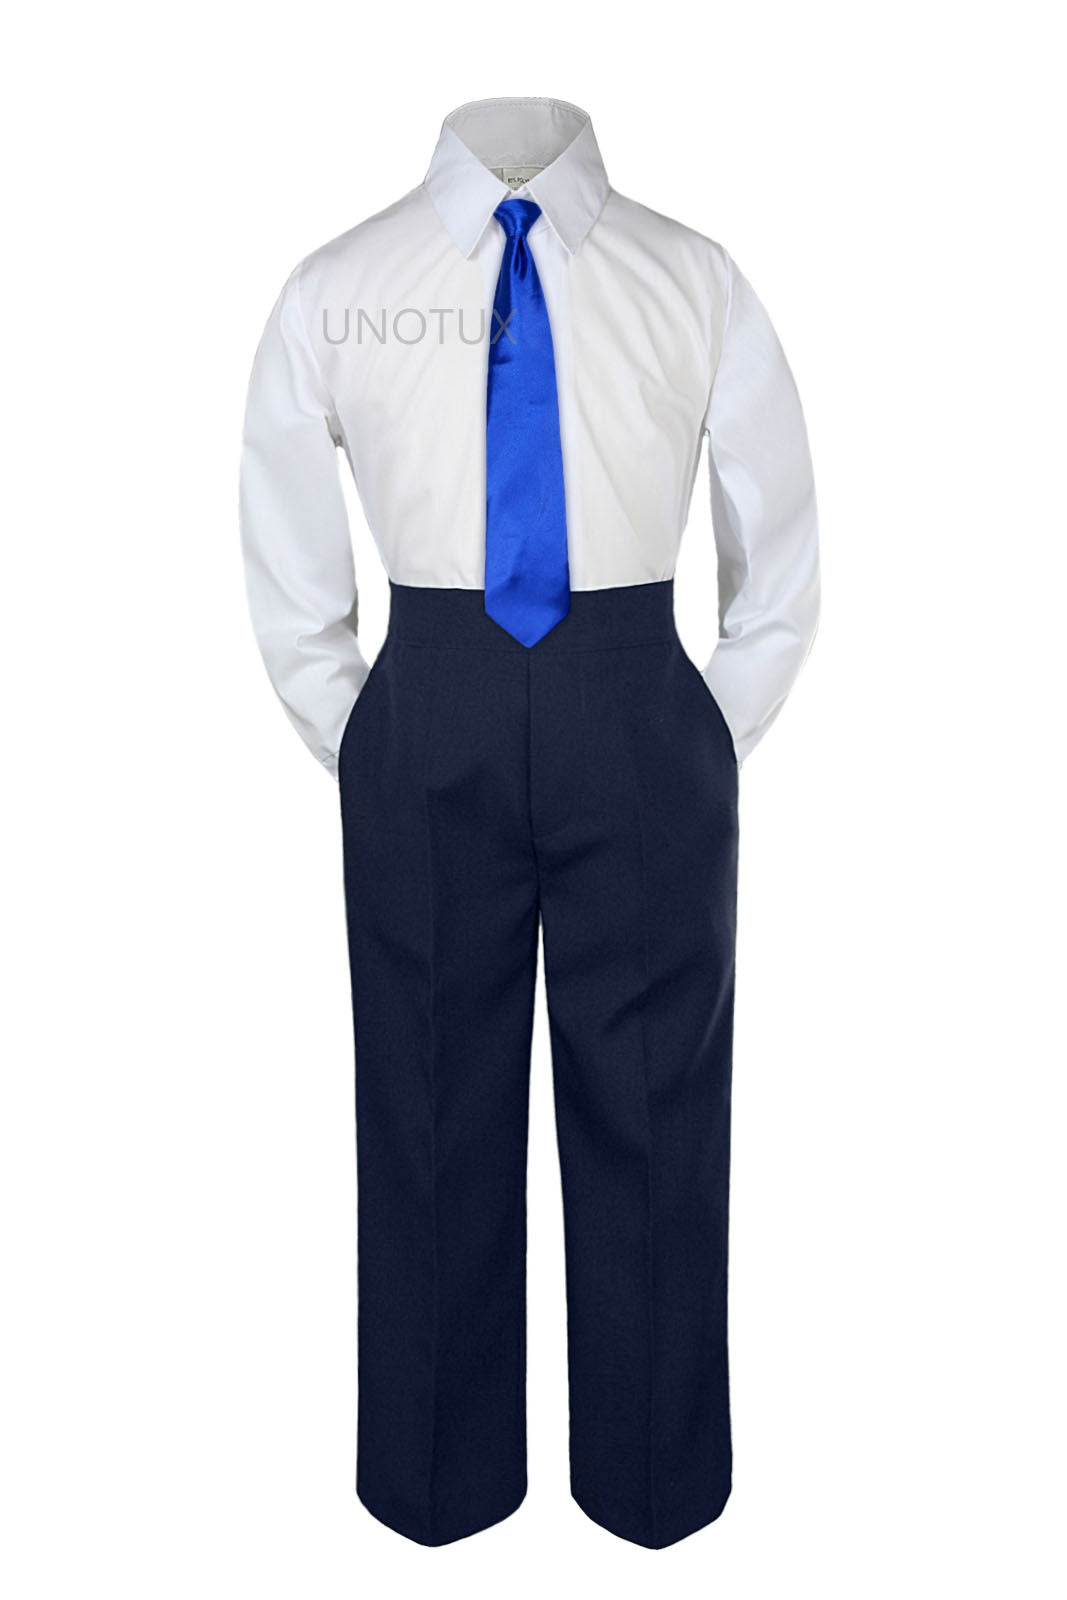 blue dress pants with white shirt